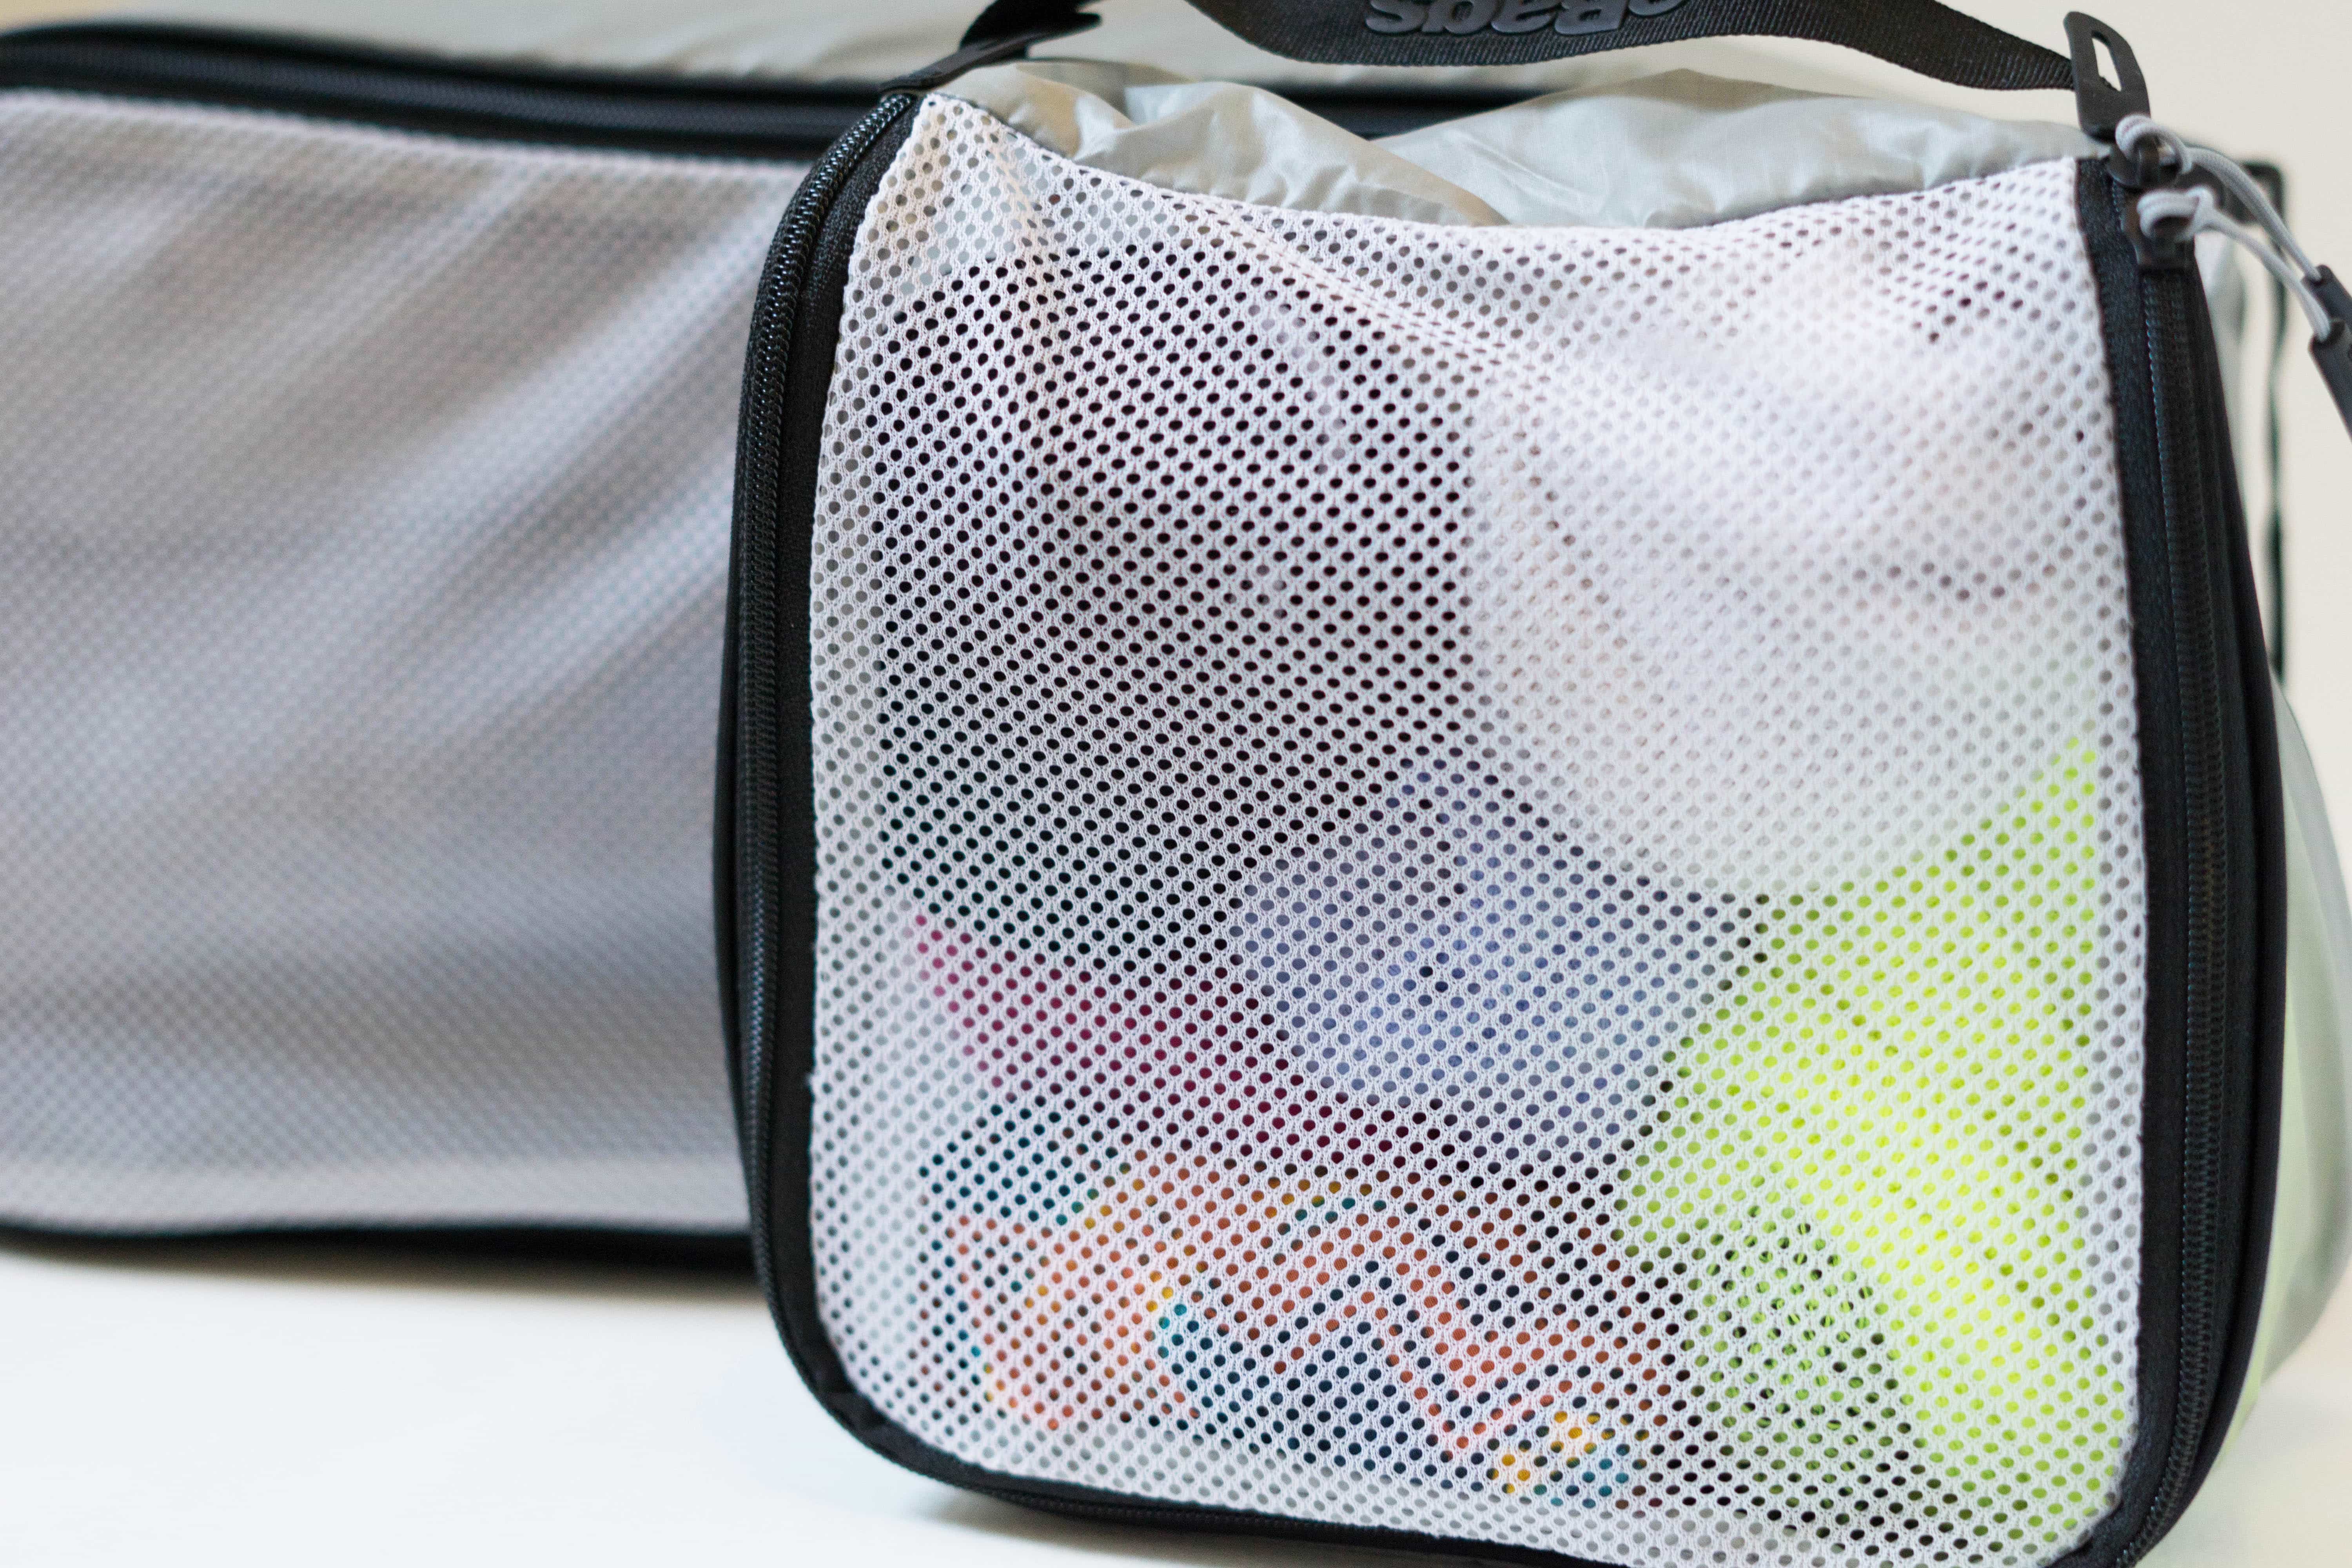 Mesh Detail on the eBags Ultralight Packing Cubes